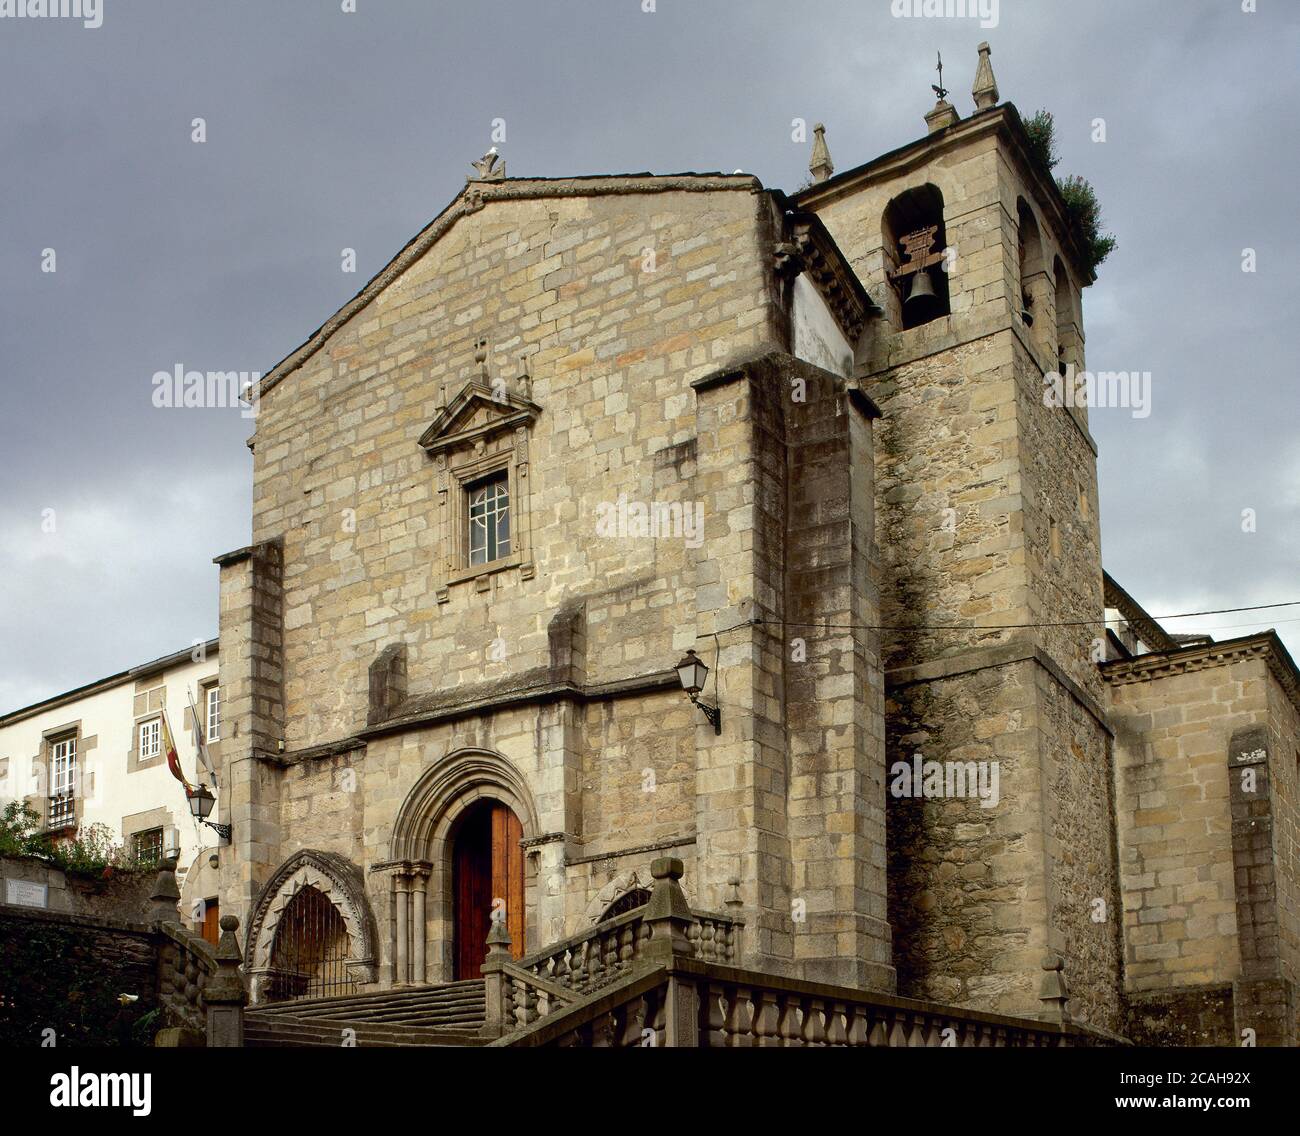 Spain, Galicia, Lugo province, Viveiro. Old Monastery of San Francisco (now the parish Church of Santiago). Temple dated from the 12th century. Romanesque doorway. Stock Photo